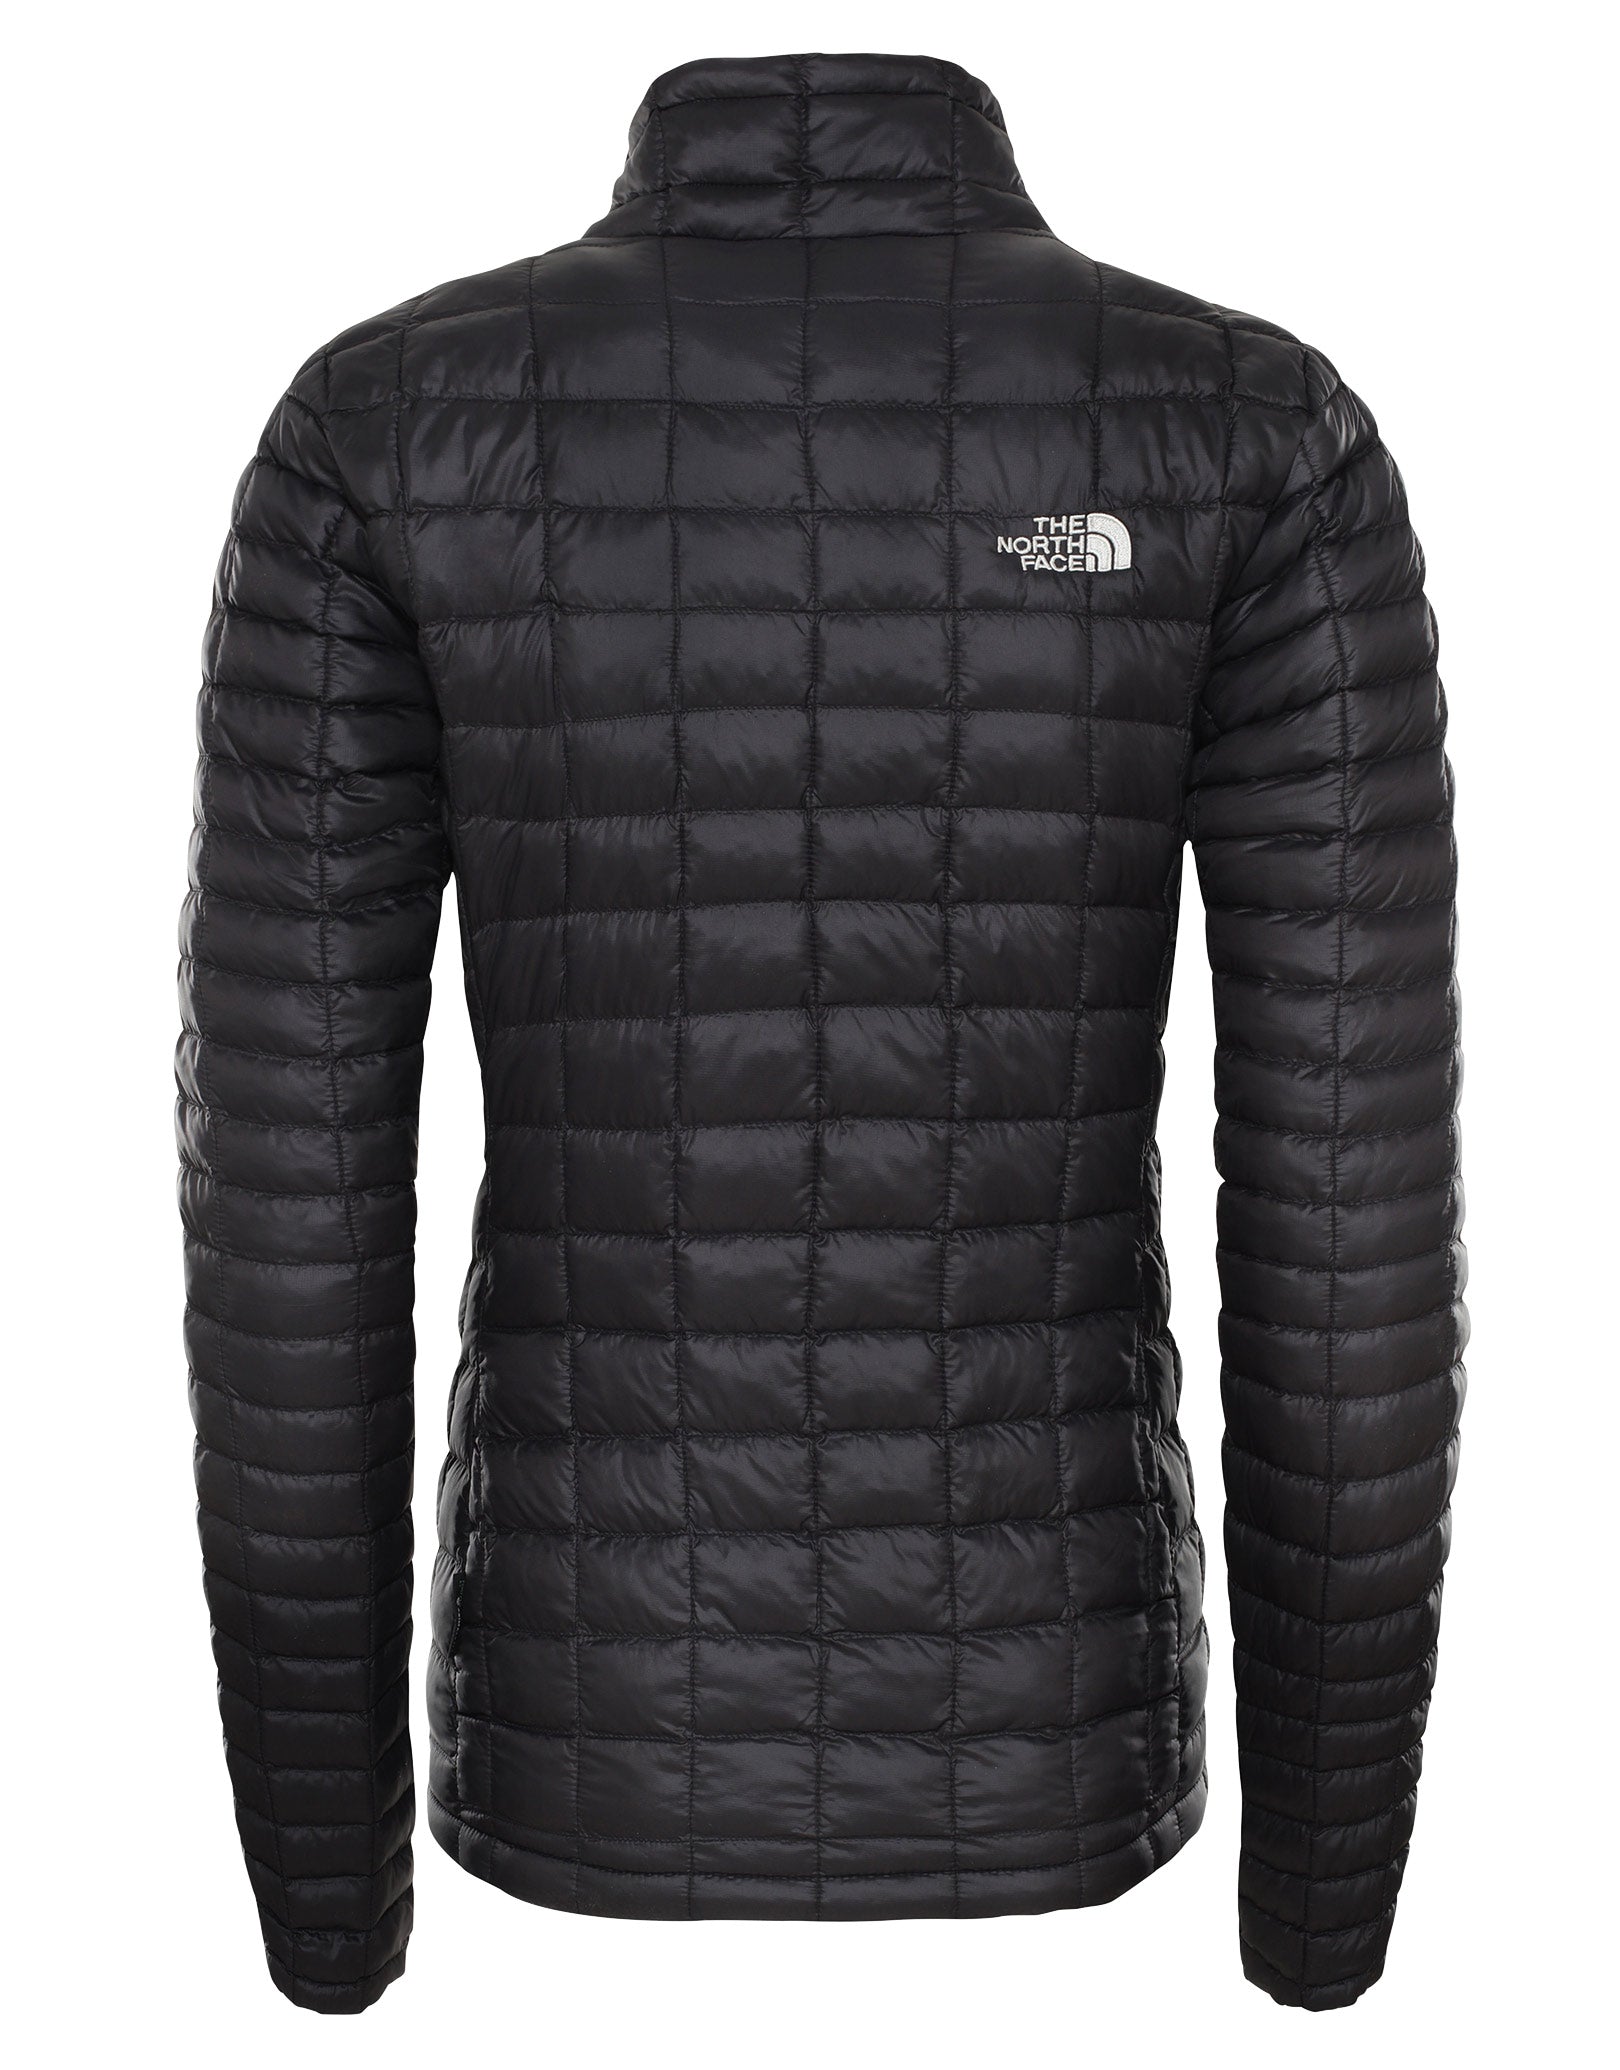 north face jackets ladies sale